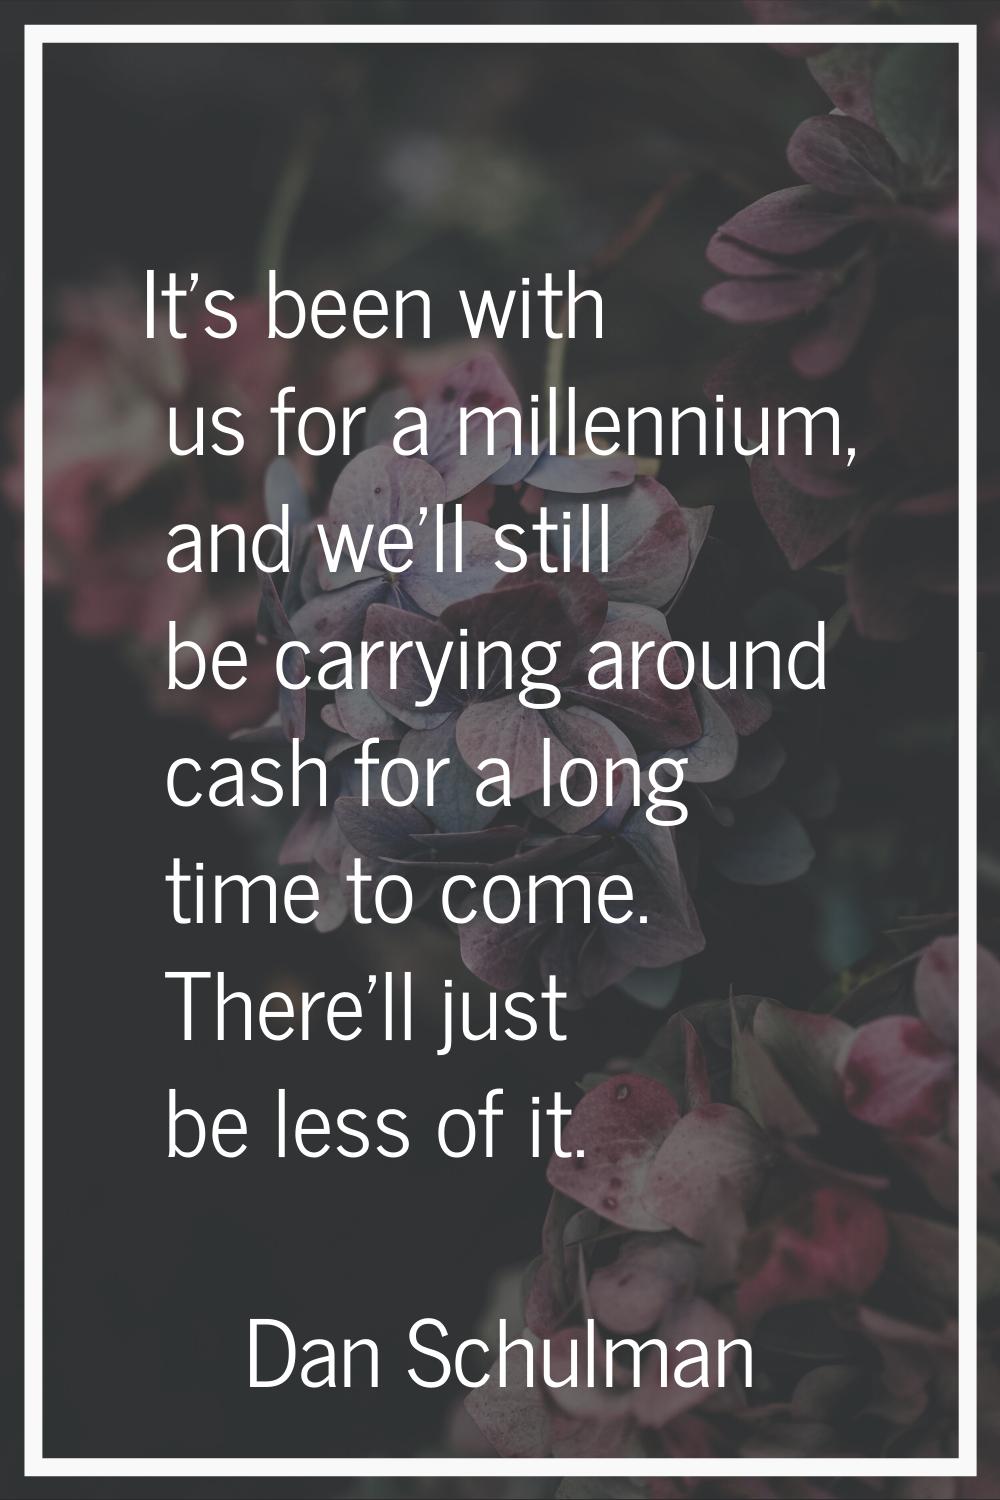 It's been with us for a millennium, and we'll still be carrying around cash for a long time to come